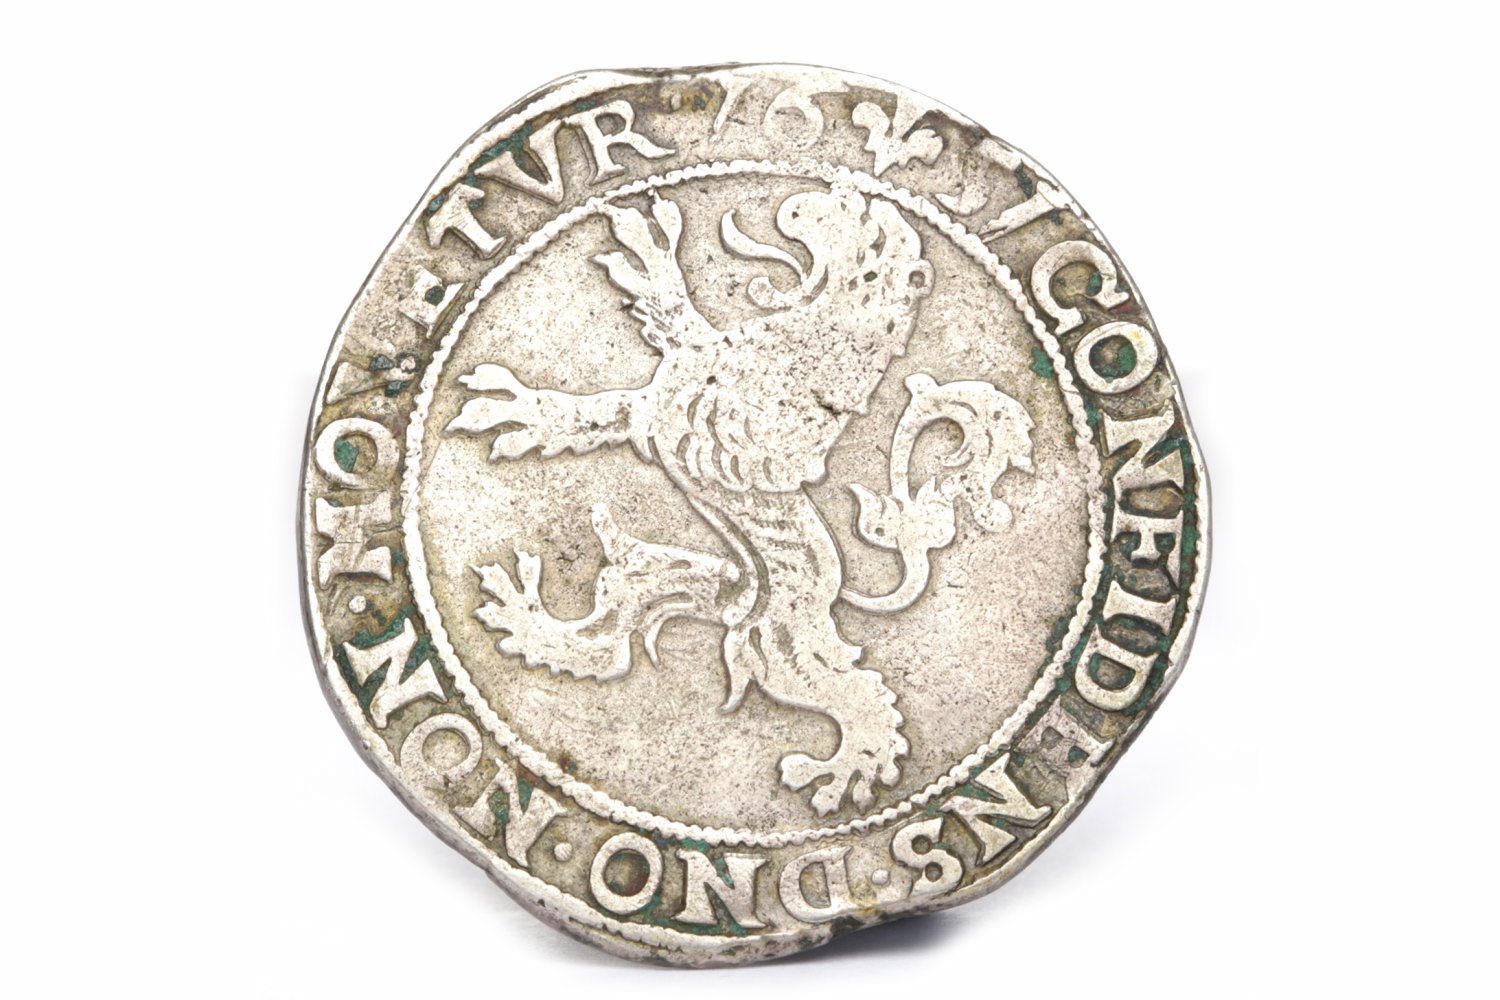 LEOPOLD I SILVER COIN DATED 1657 approximately 40mm, approximately 26.